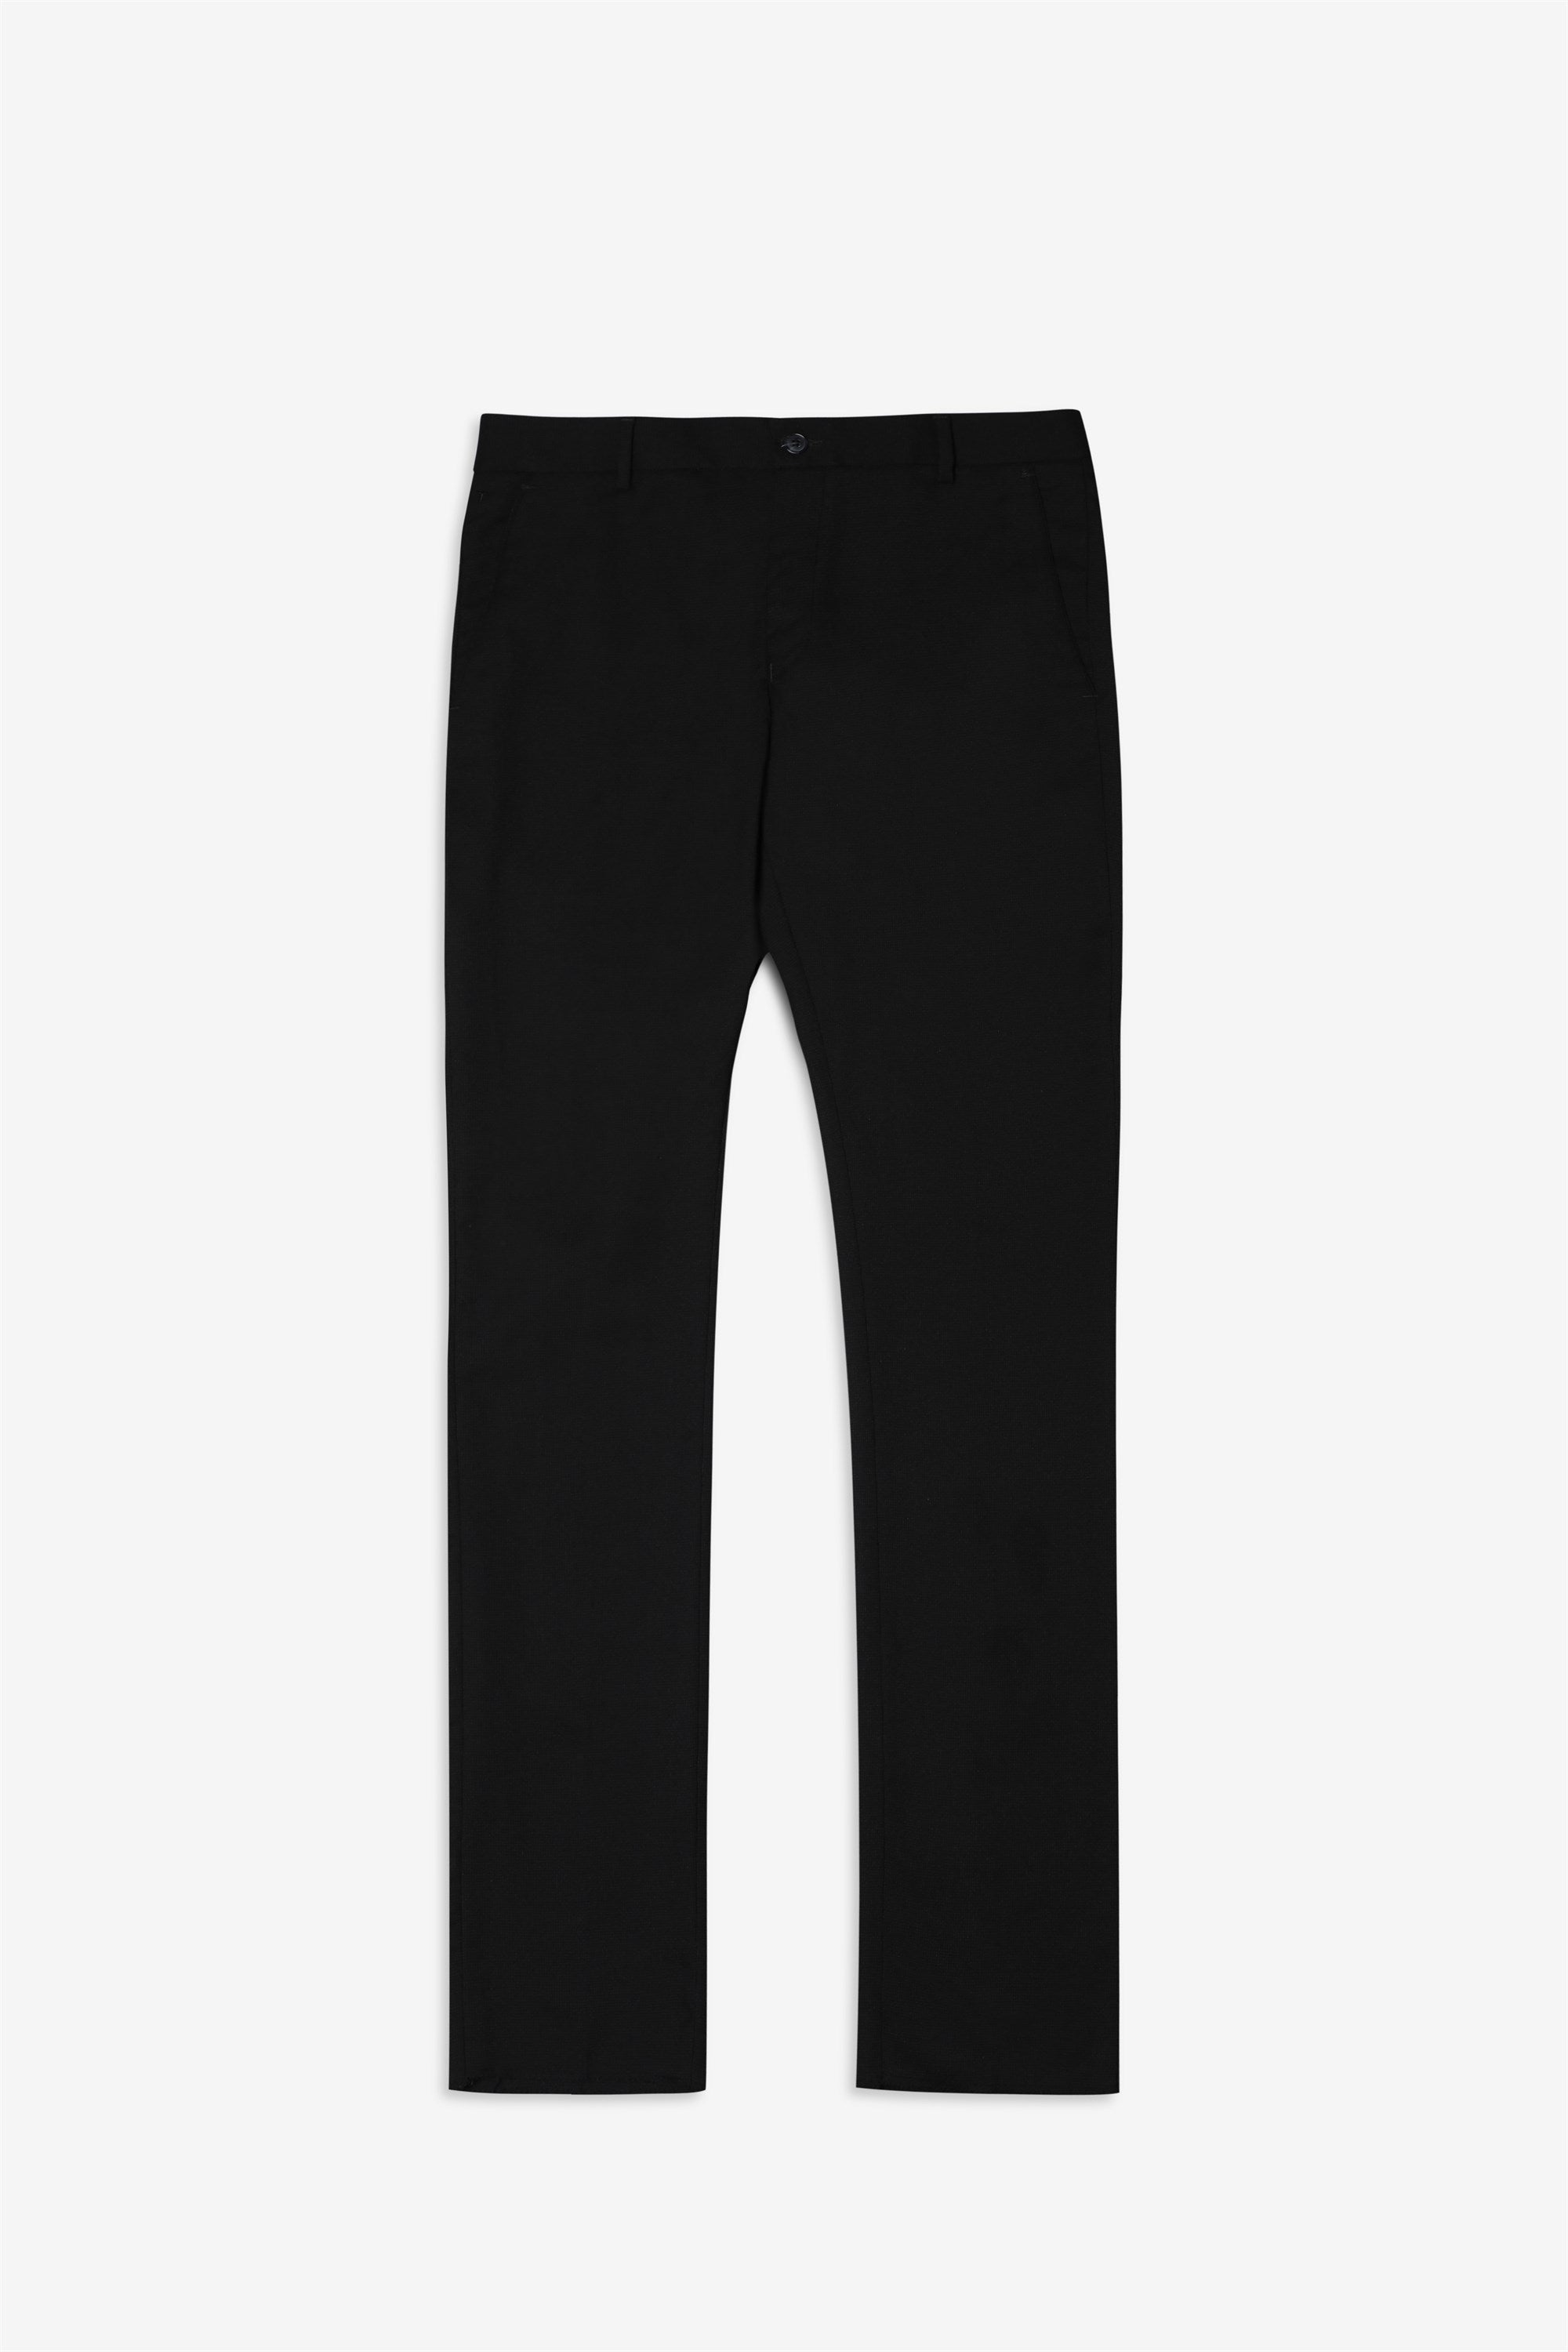 T the brand Stretch Formal Micro Dobby Trouser - Black